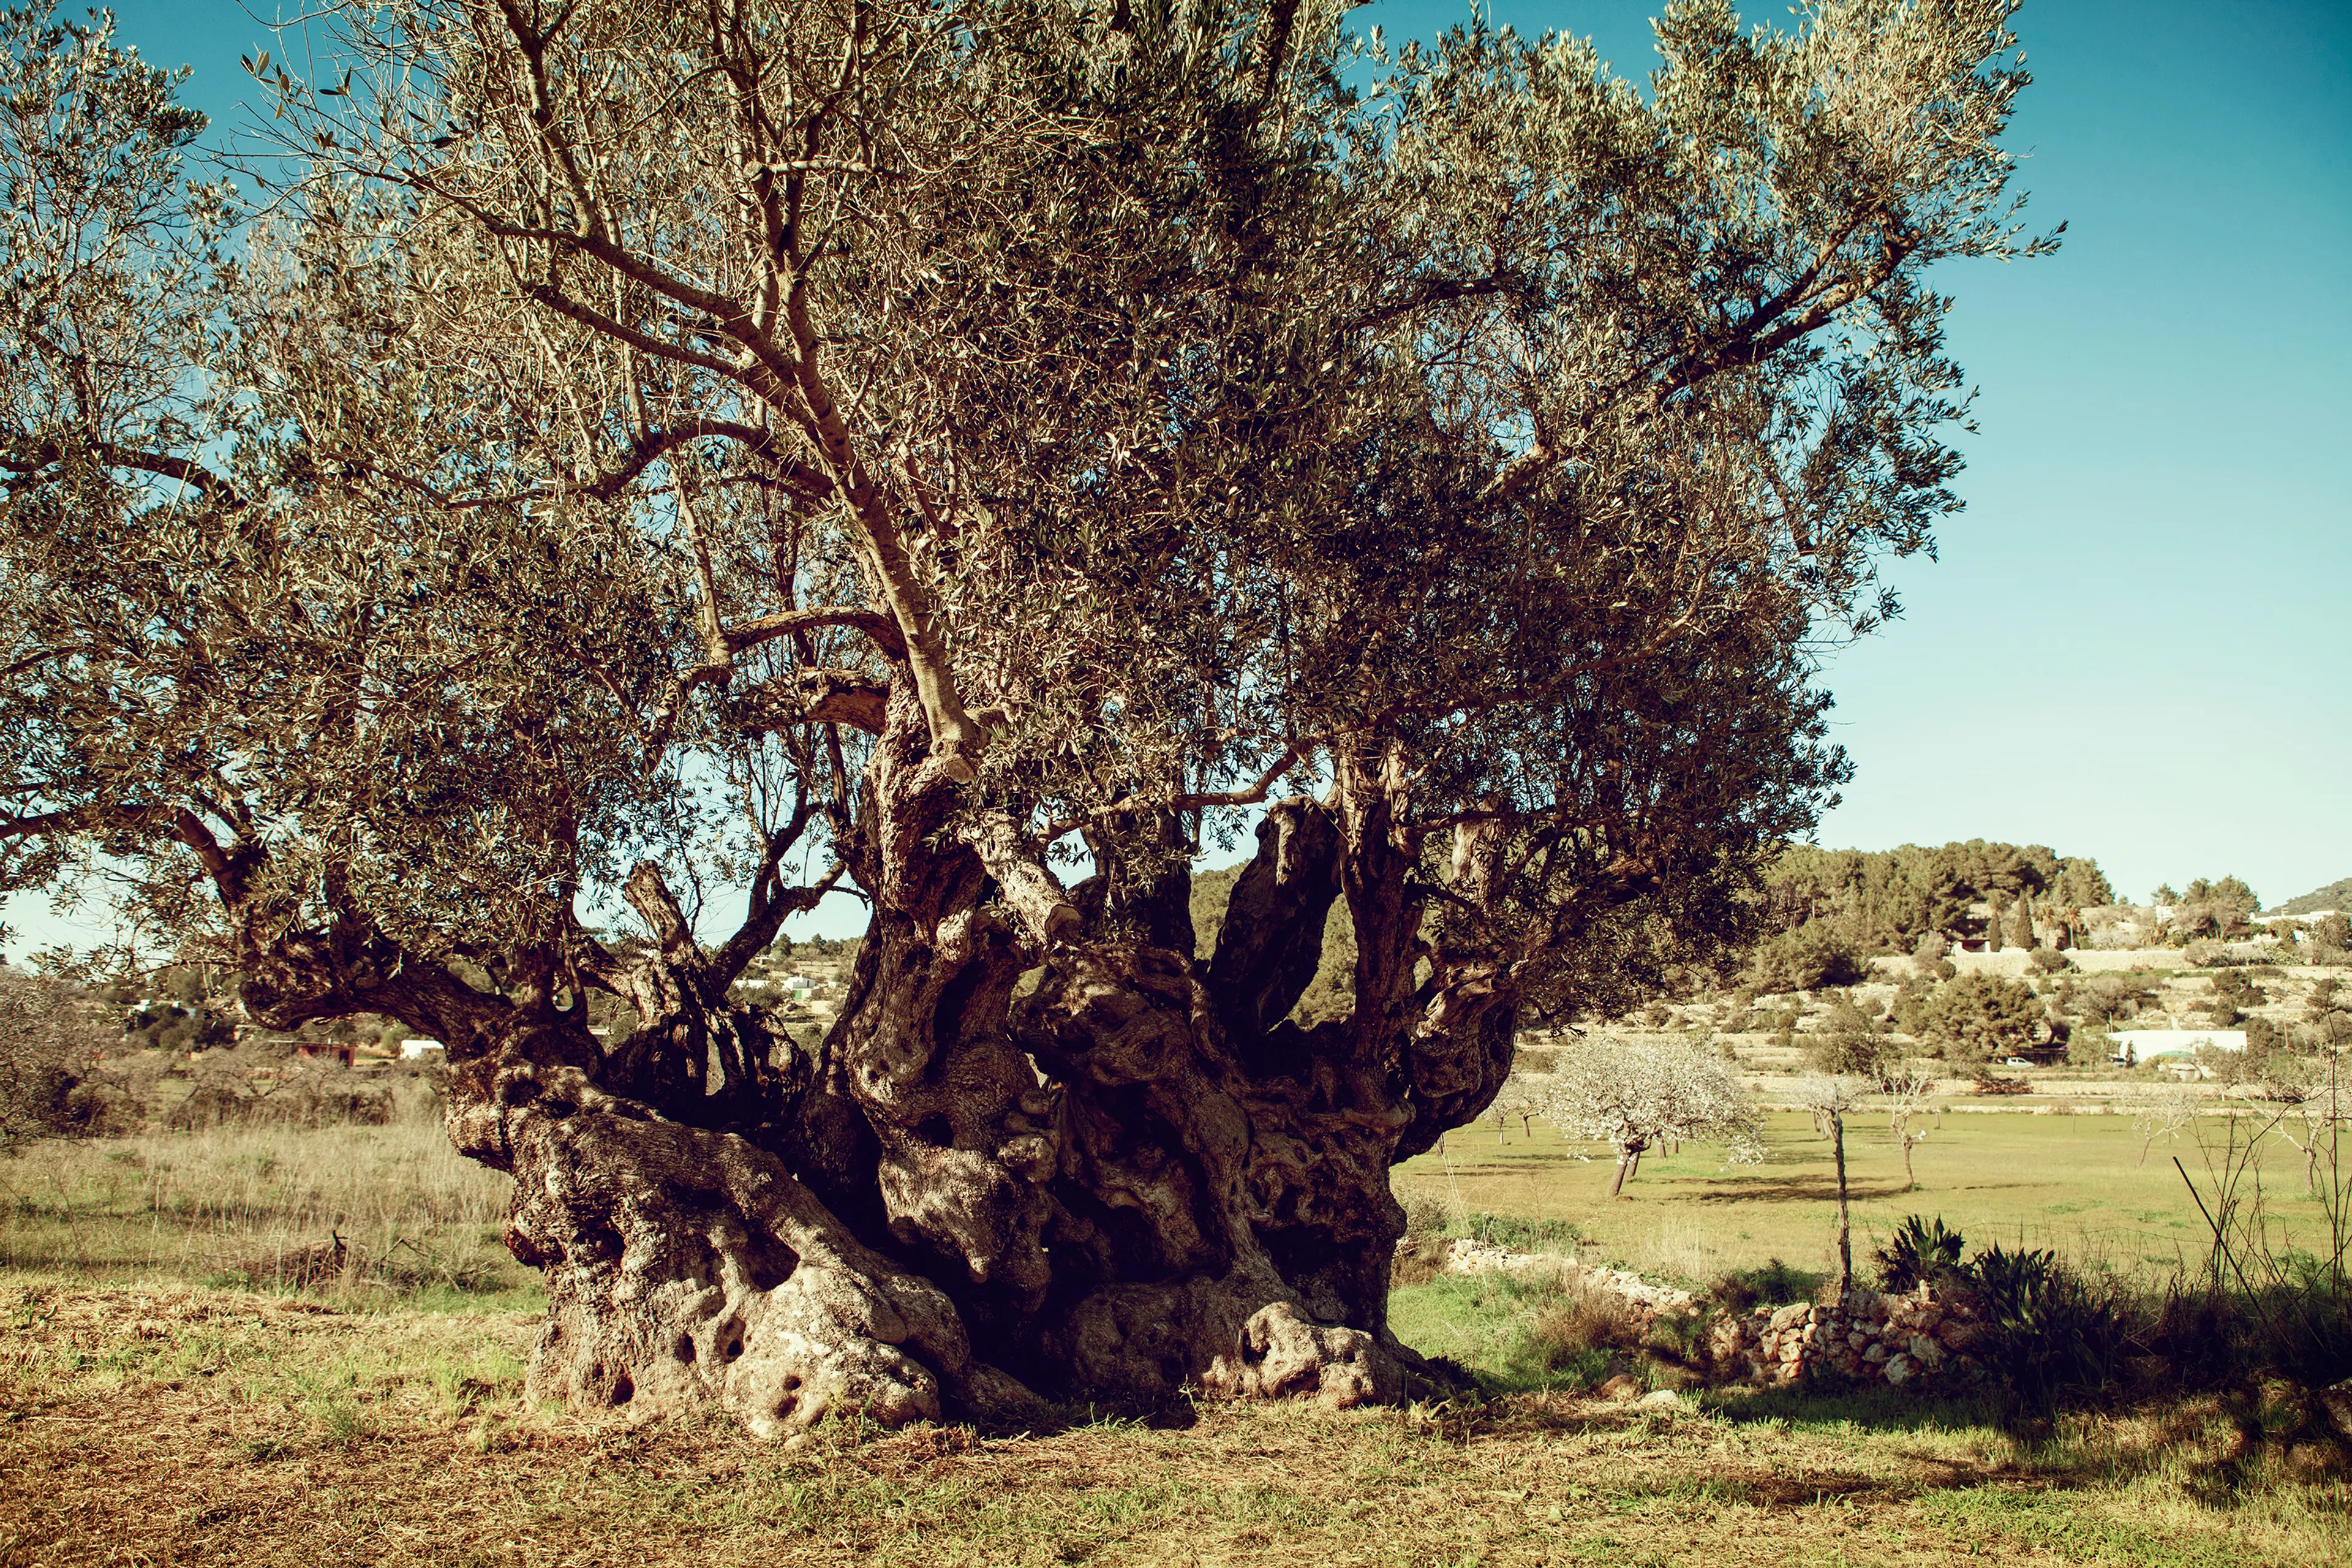 Olive Oil Mill